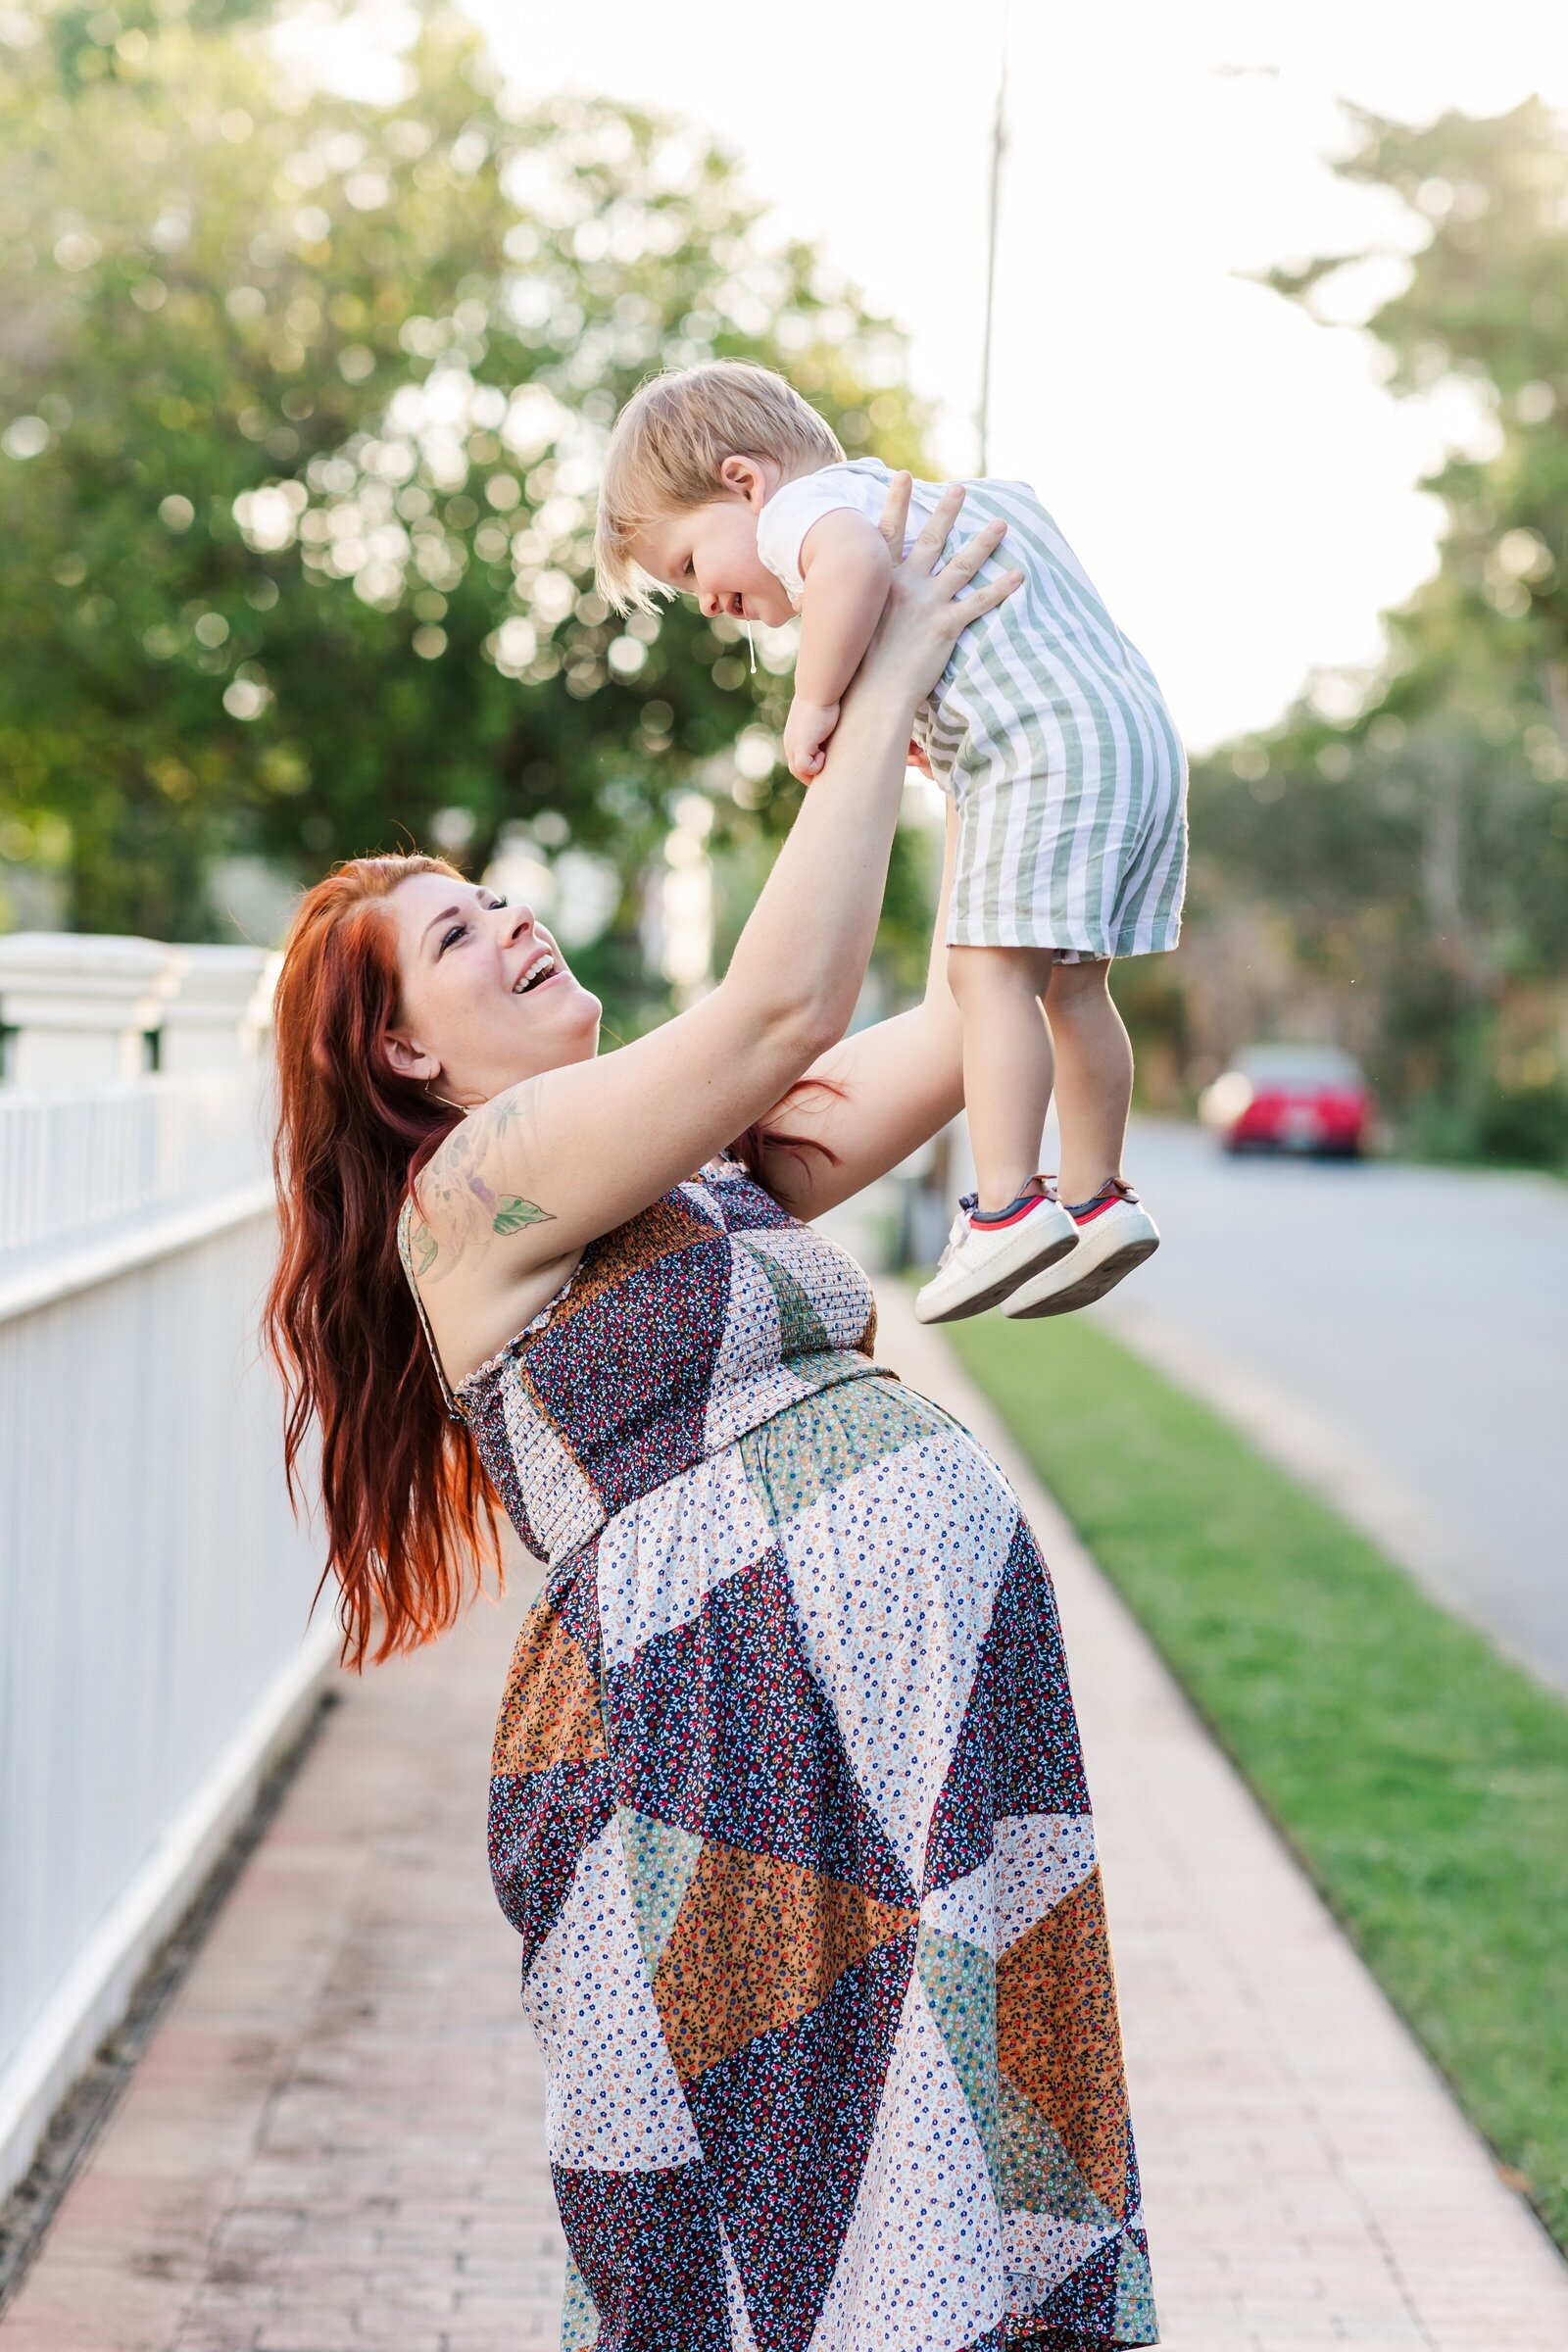 Downtown Pensacola Family Photography session with family of 4. Mom tossing son into the air.